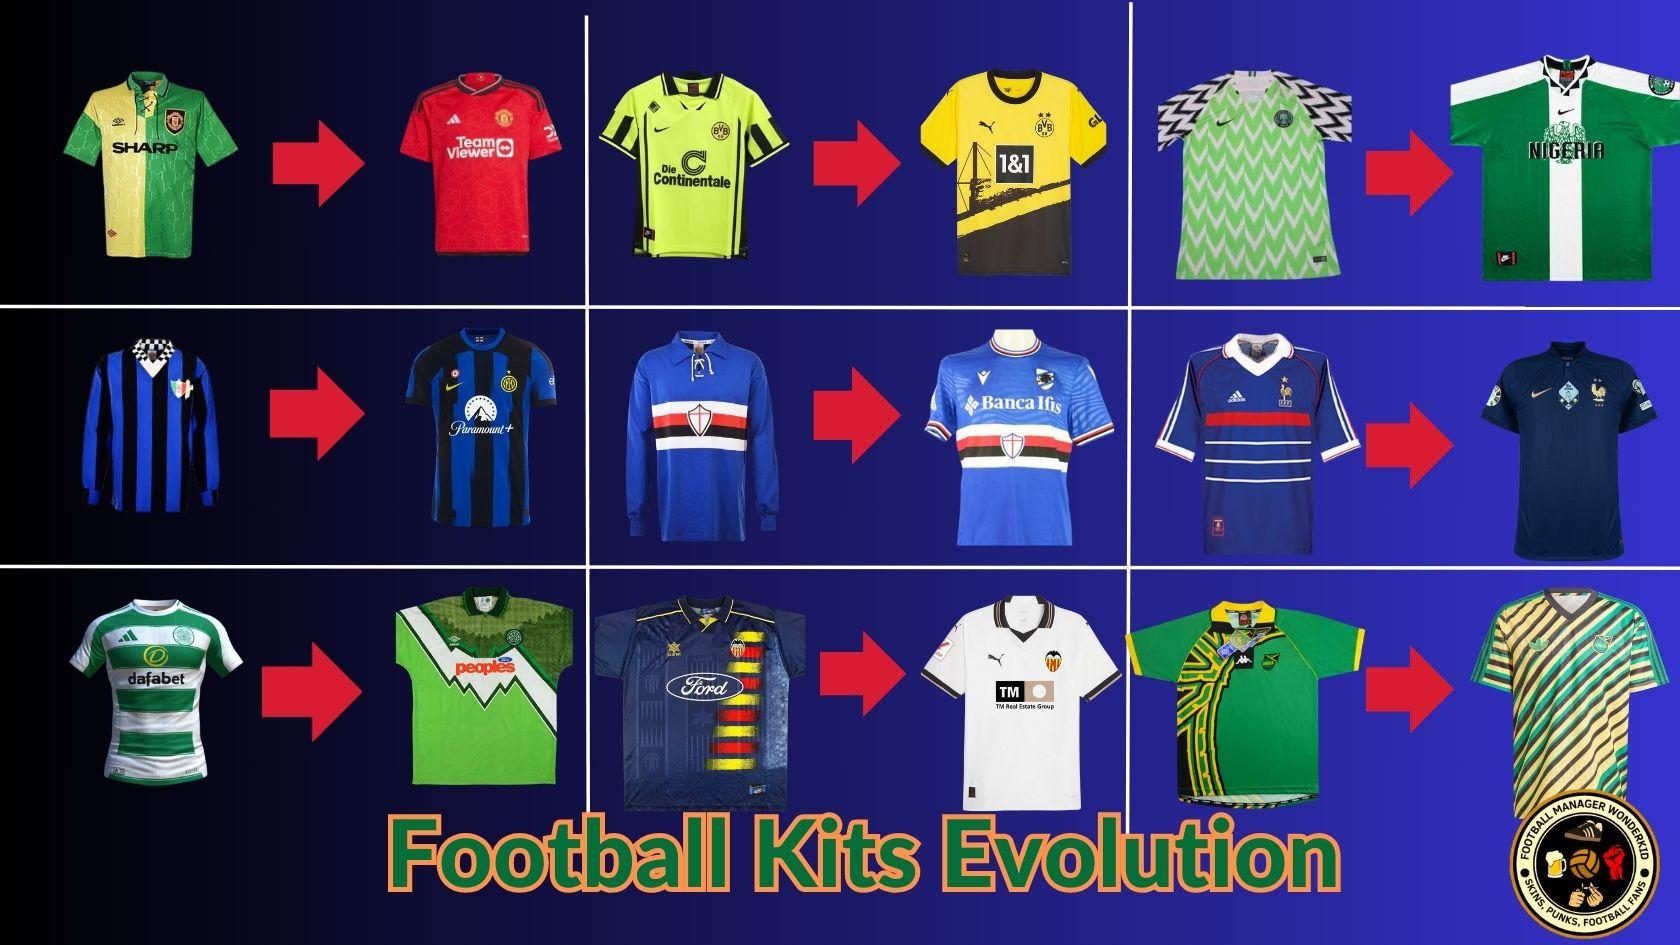 Football Kits Evolution and Their Cultural Impact